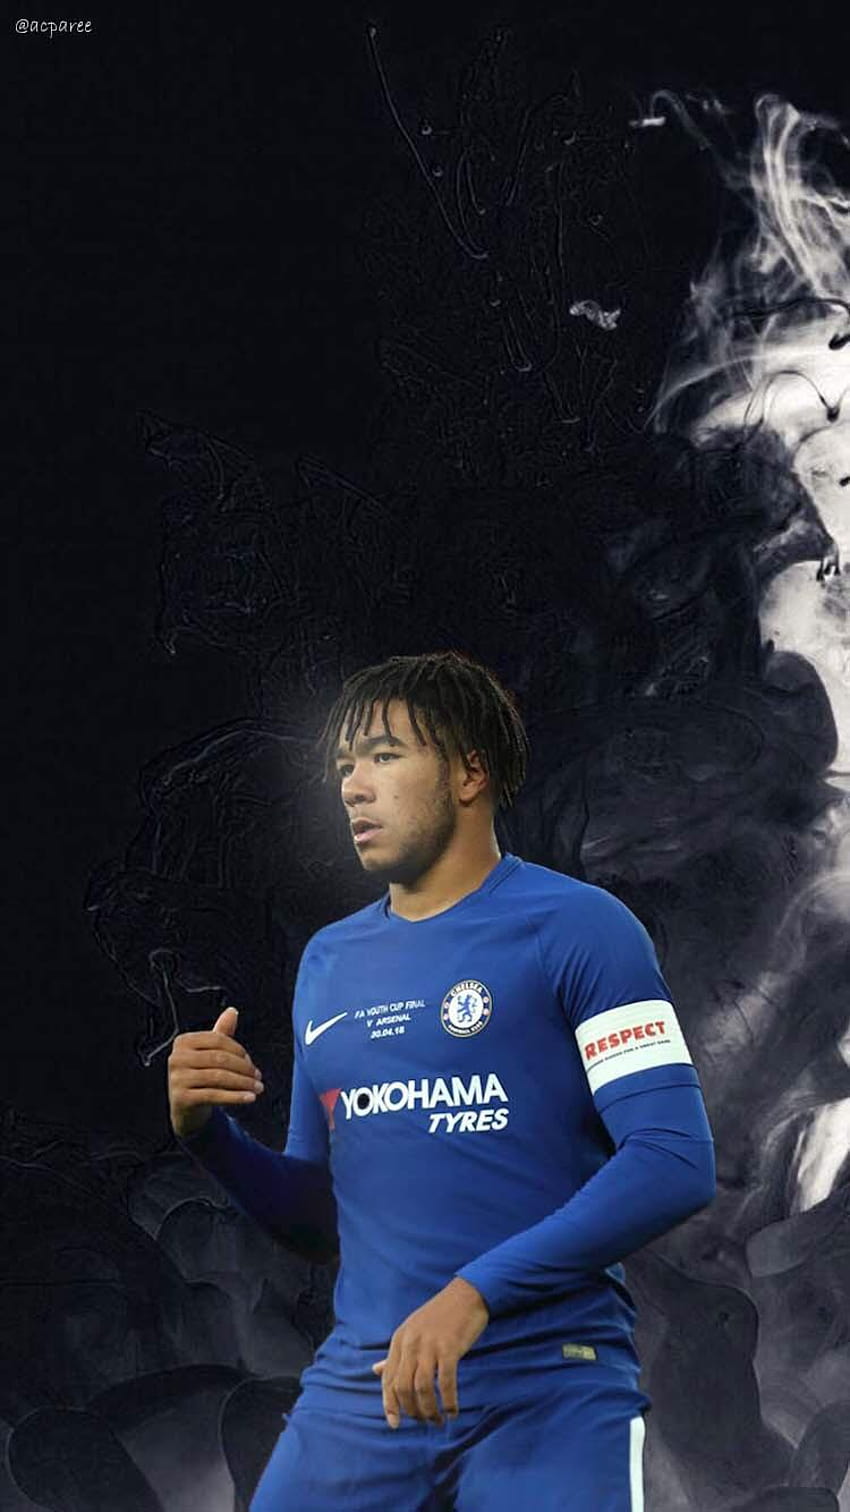 This was my first time using hop but just decided to make a Reece James . Feedback appreciated! : r/chelseafc, reece james champions league HD phone wallpaper